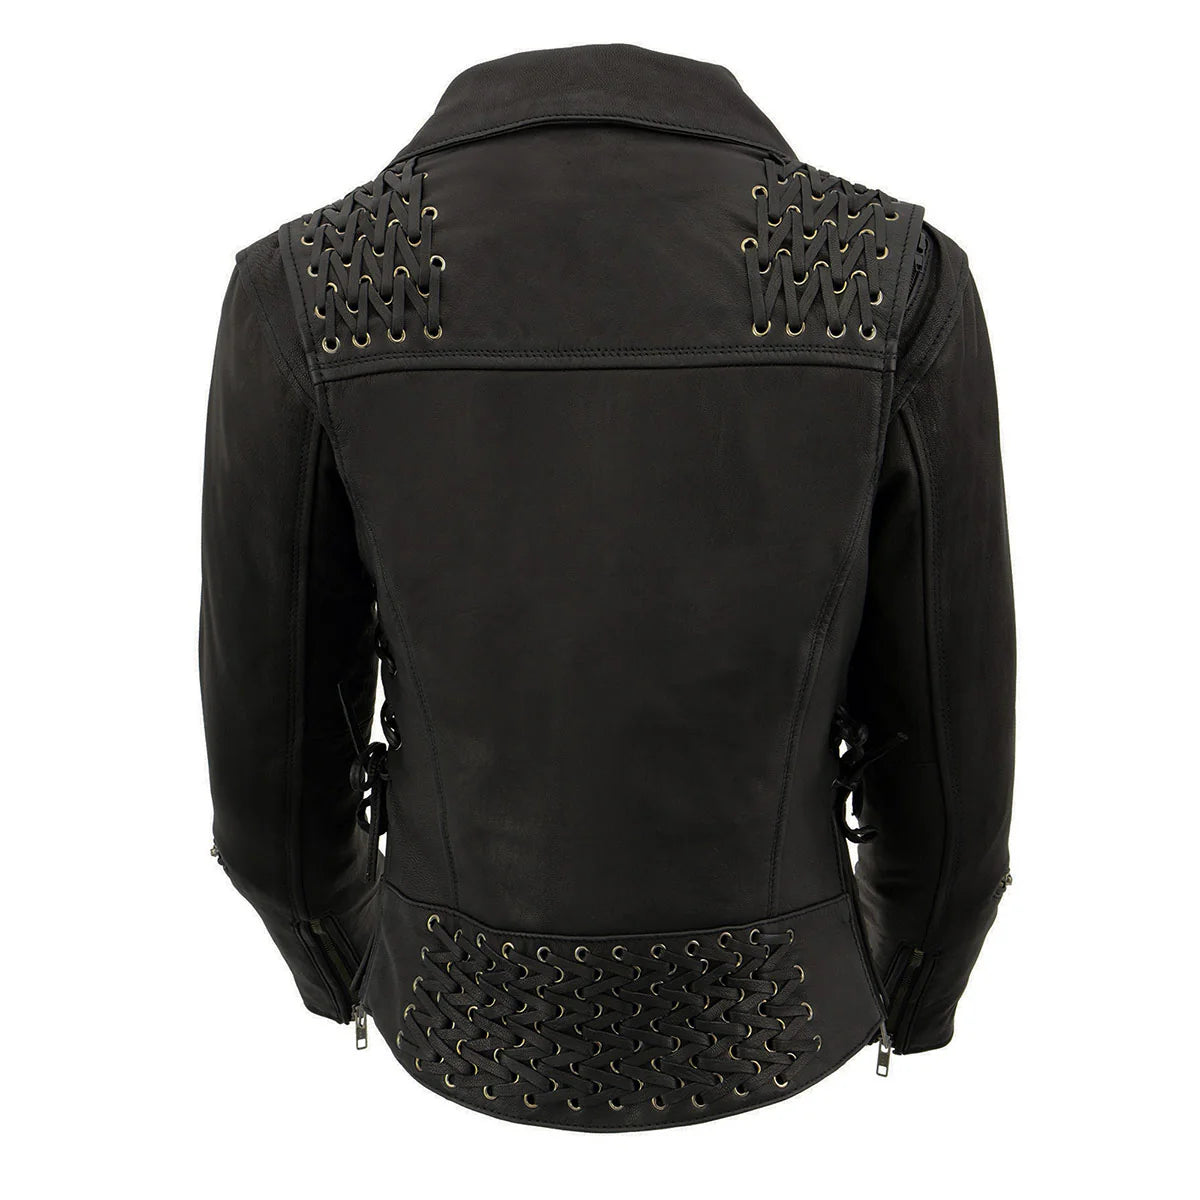 Women's Black Leather Lightweight Lace to Lace Jacket